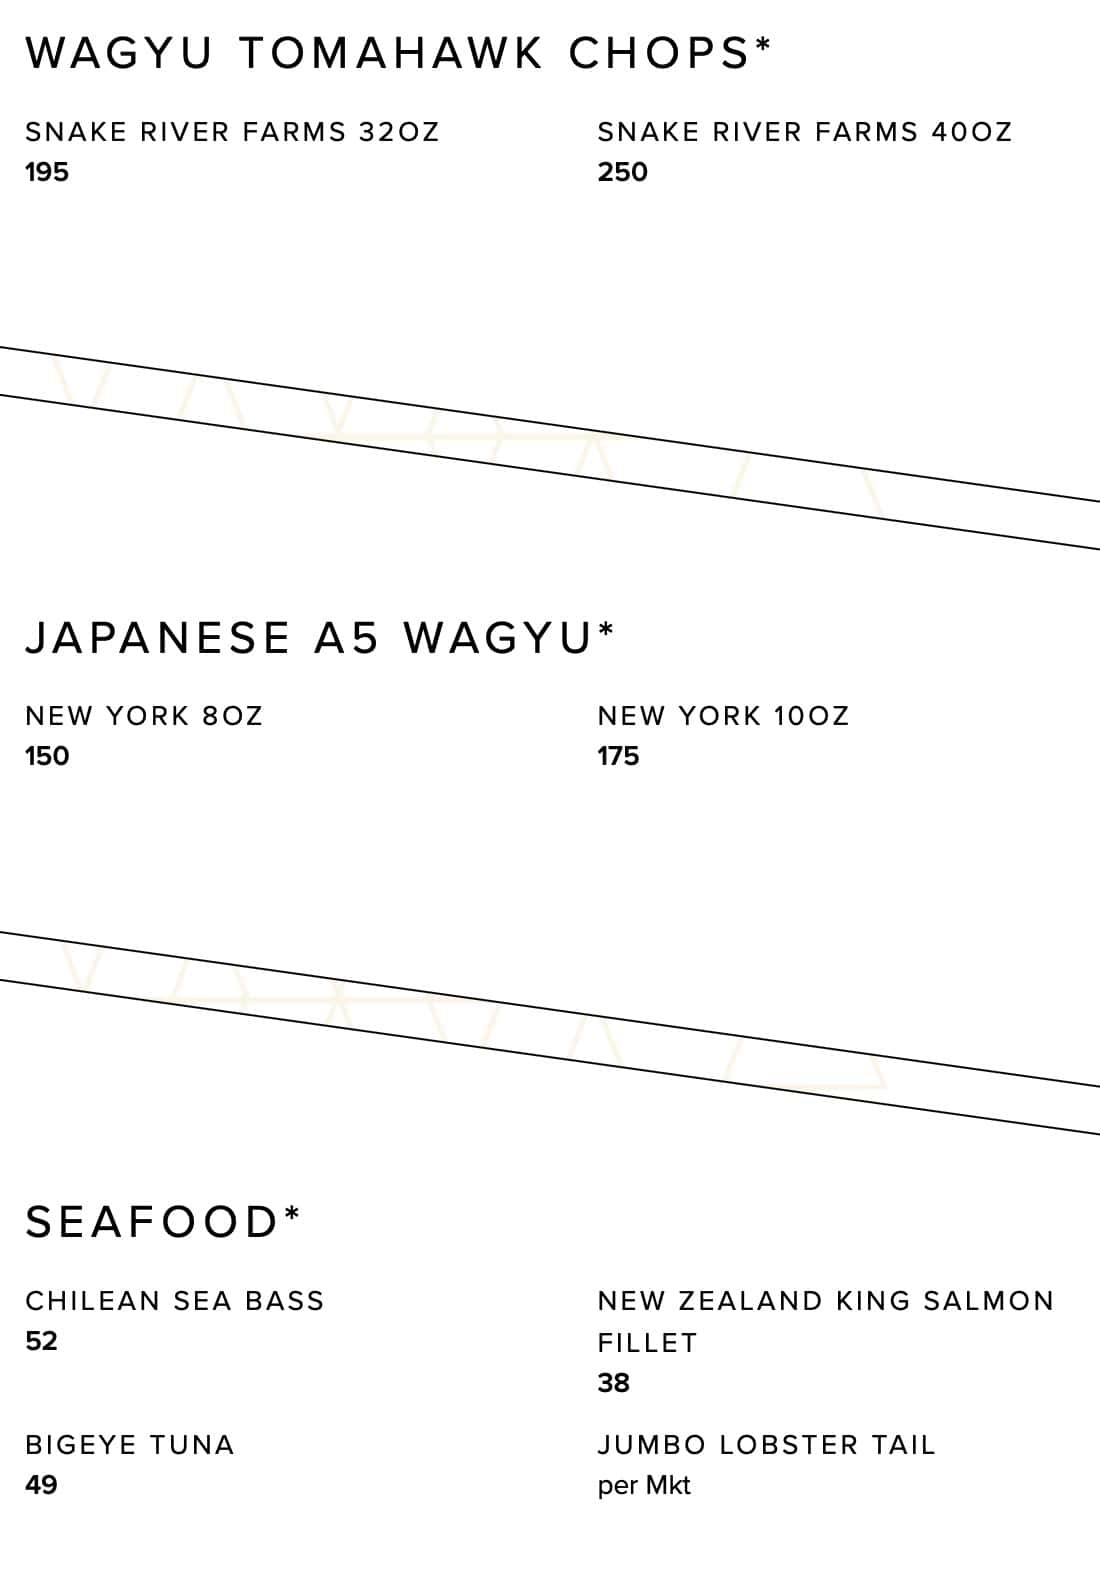 Mastro's Steakhouse Wagyu and Seafood Menu